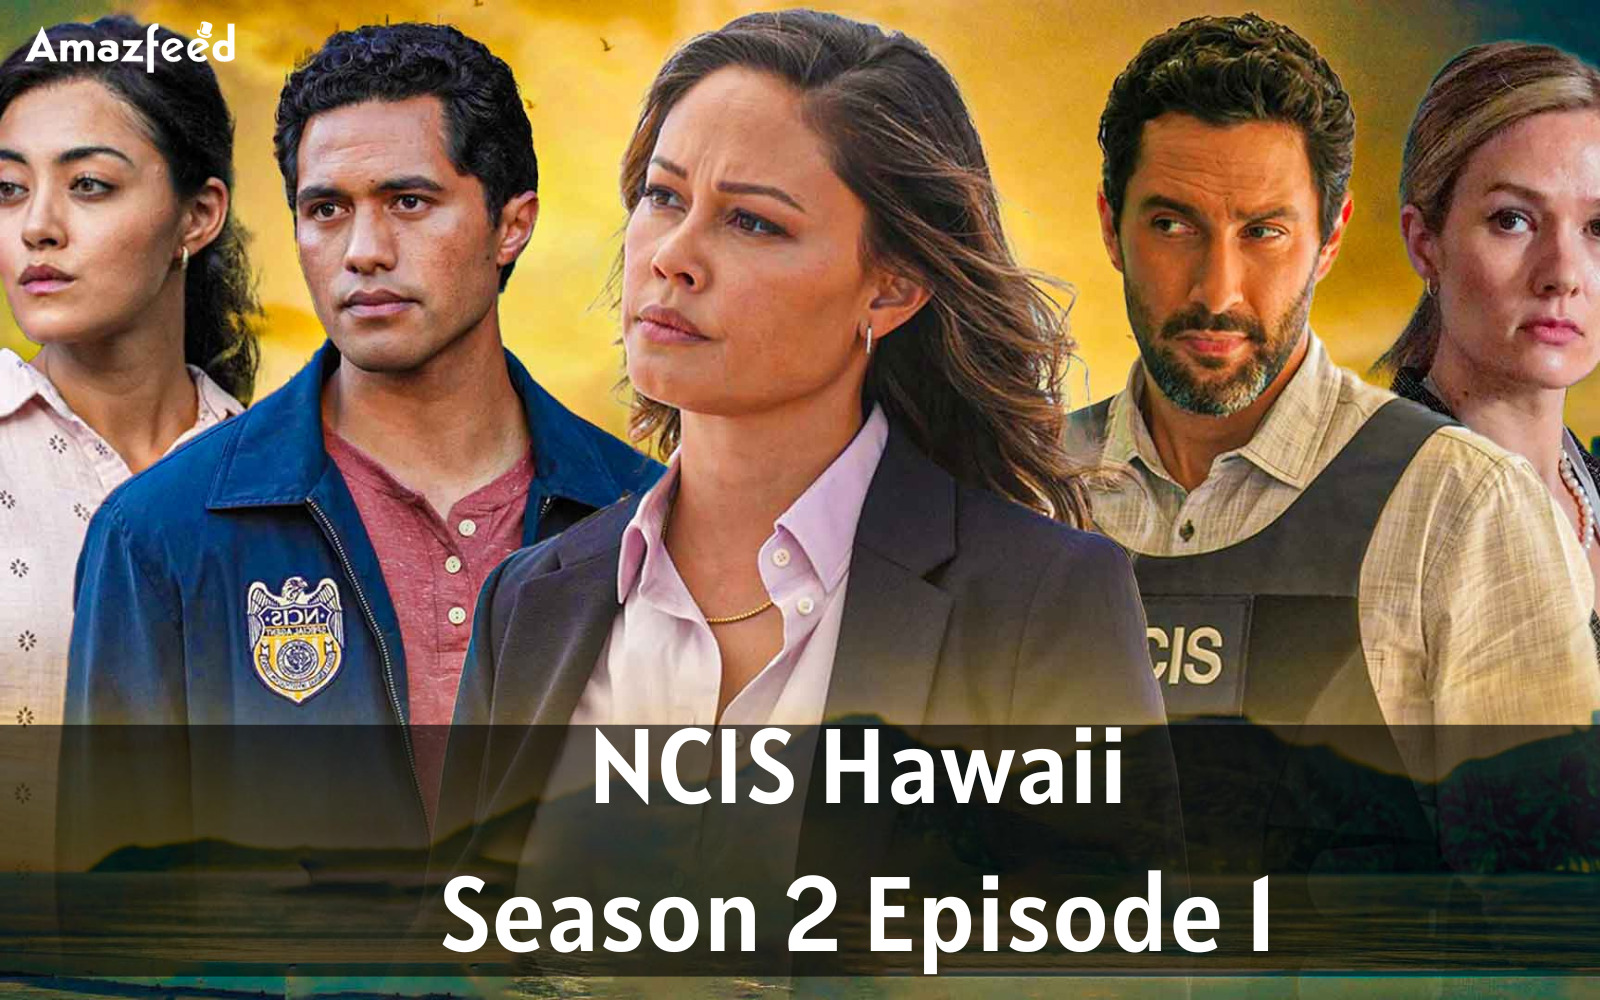 When Is NCIS Hawaii Season 2 Episode 1 Coming Out (Release Date)